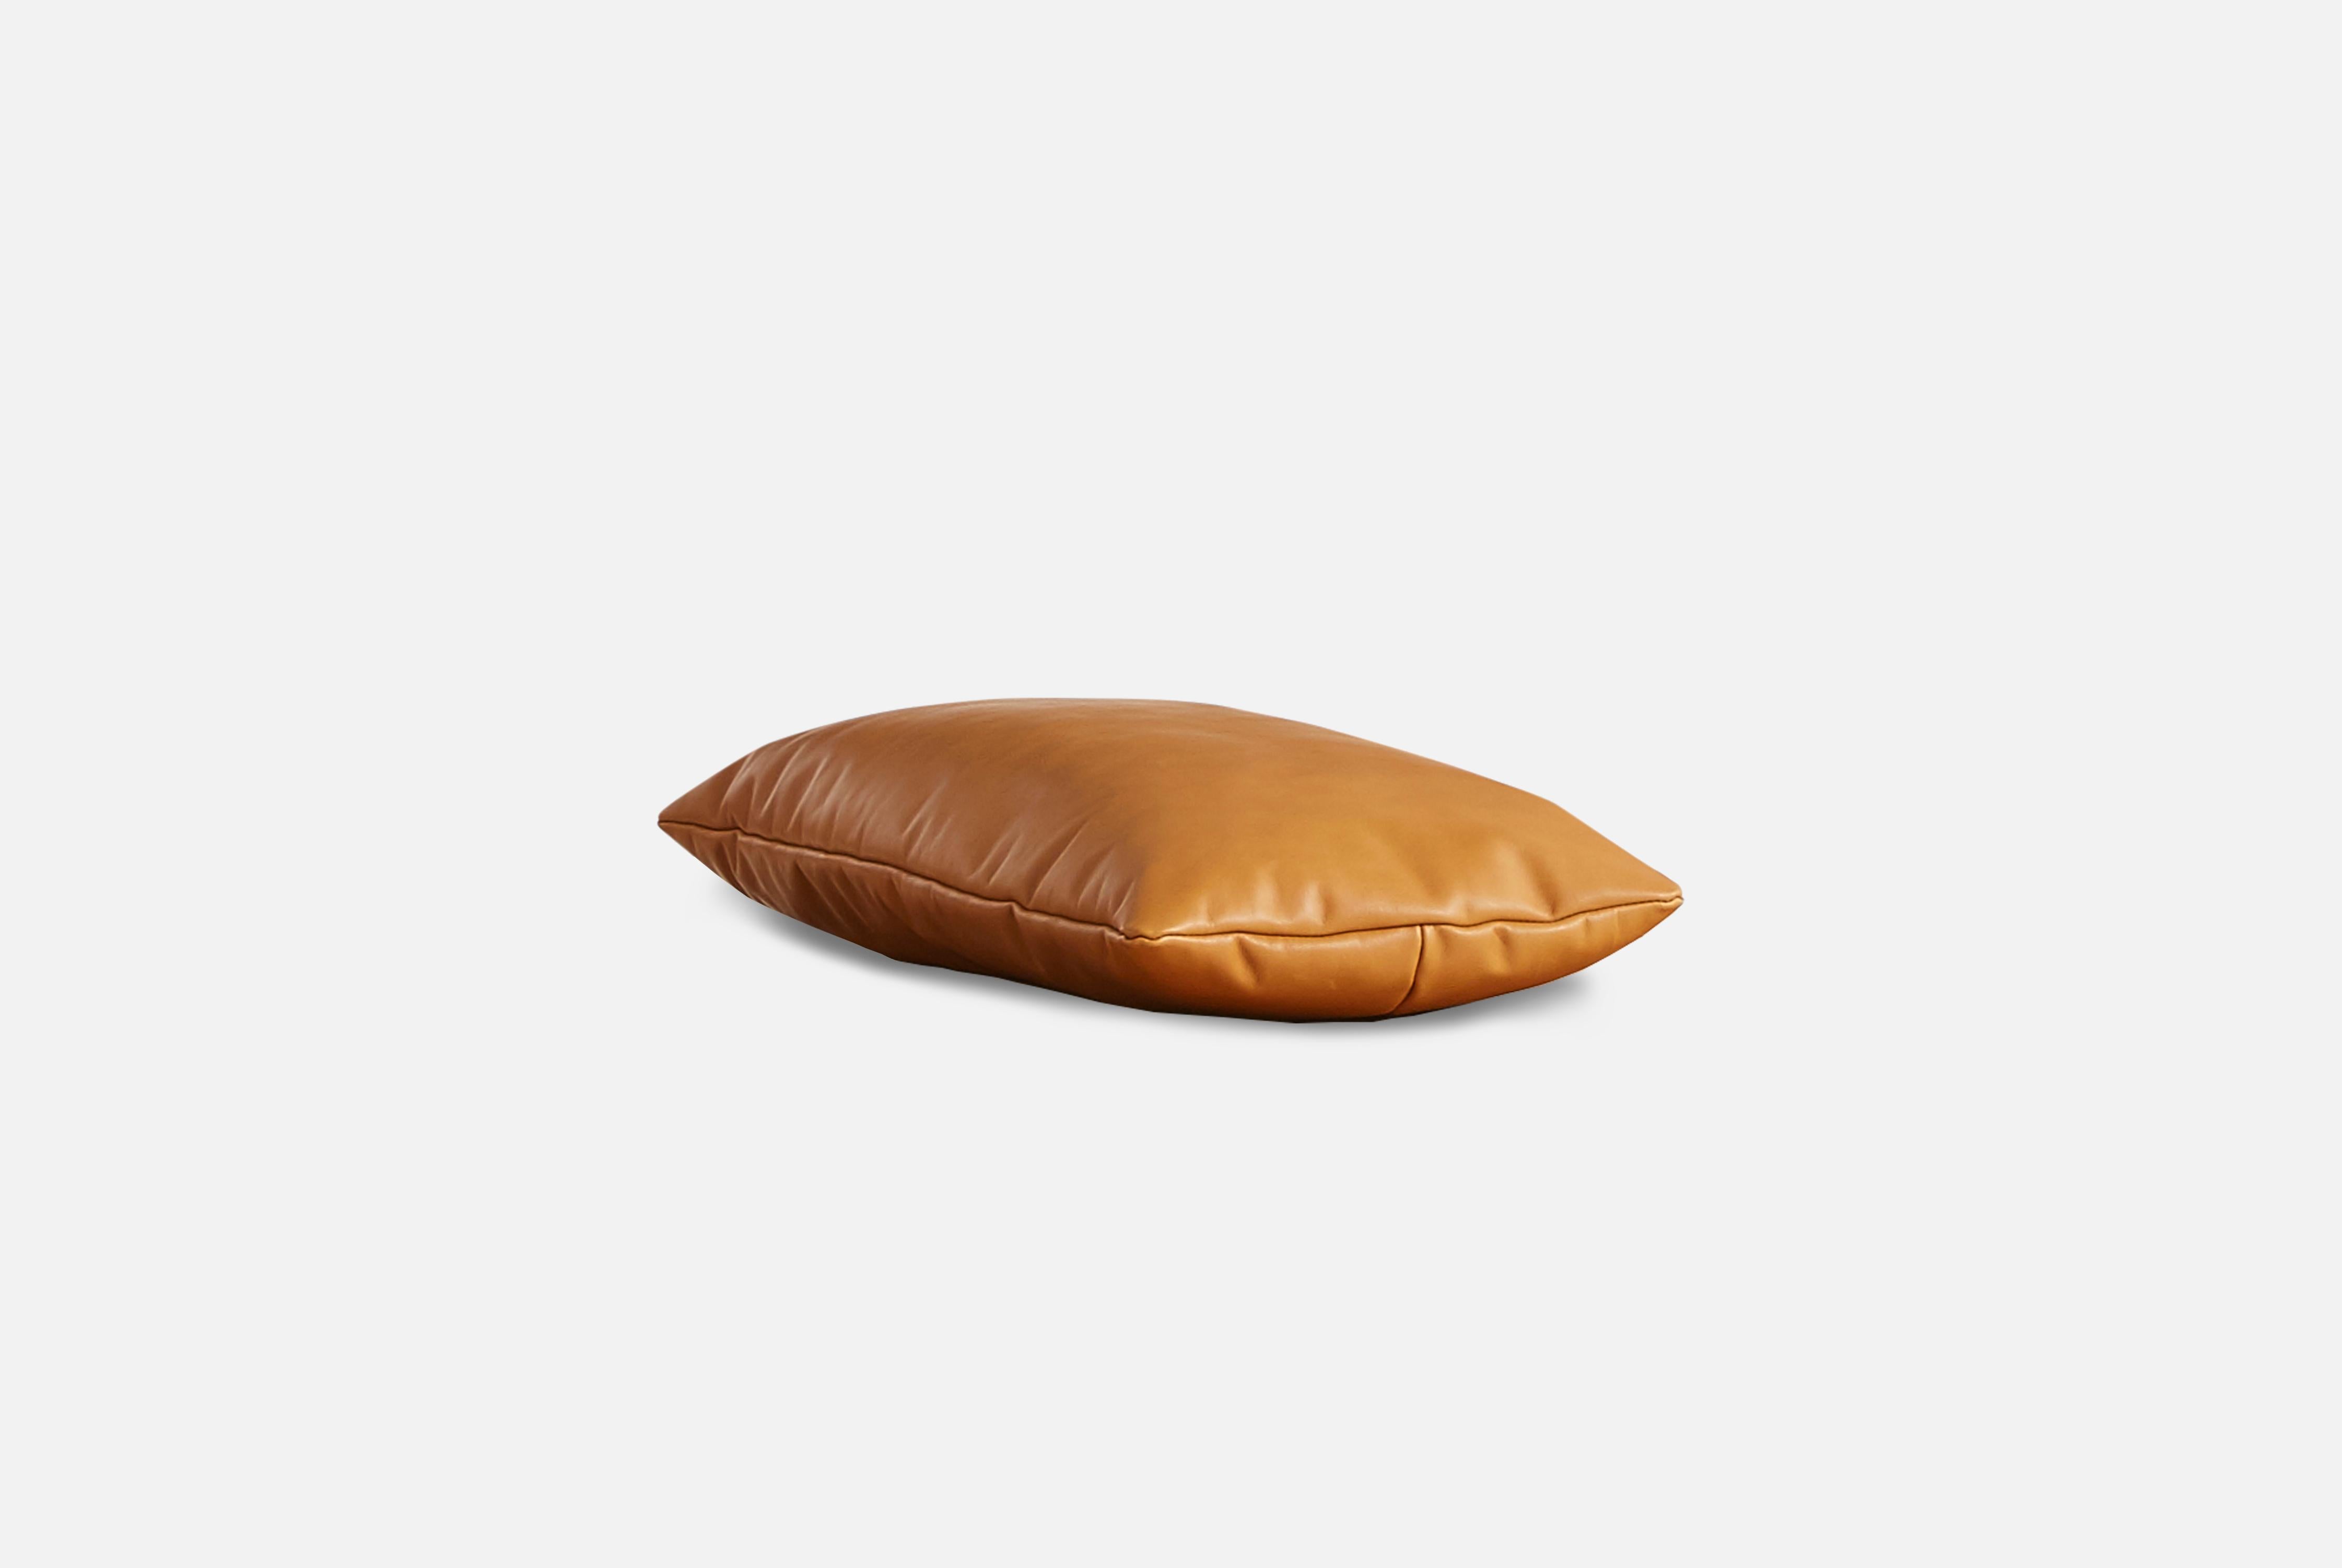 Cognac leather level pillow by Msds Studio
Materials: Camo Leather, Fabric
Dimensions: D 23.5 x W 67 x H 8.5 cm

The founders, Mia and Torben Koed, decided to put their 30 years of experience into a new project. It was time for a change and a